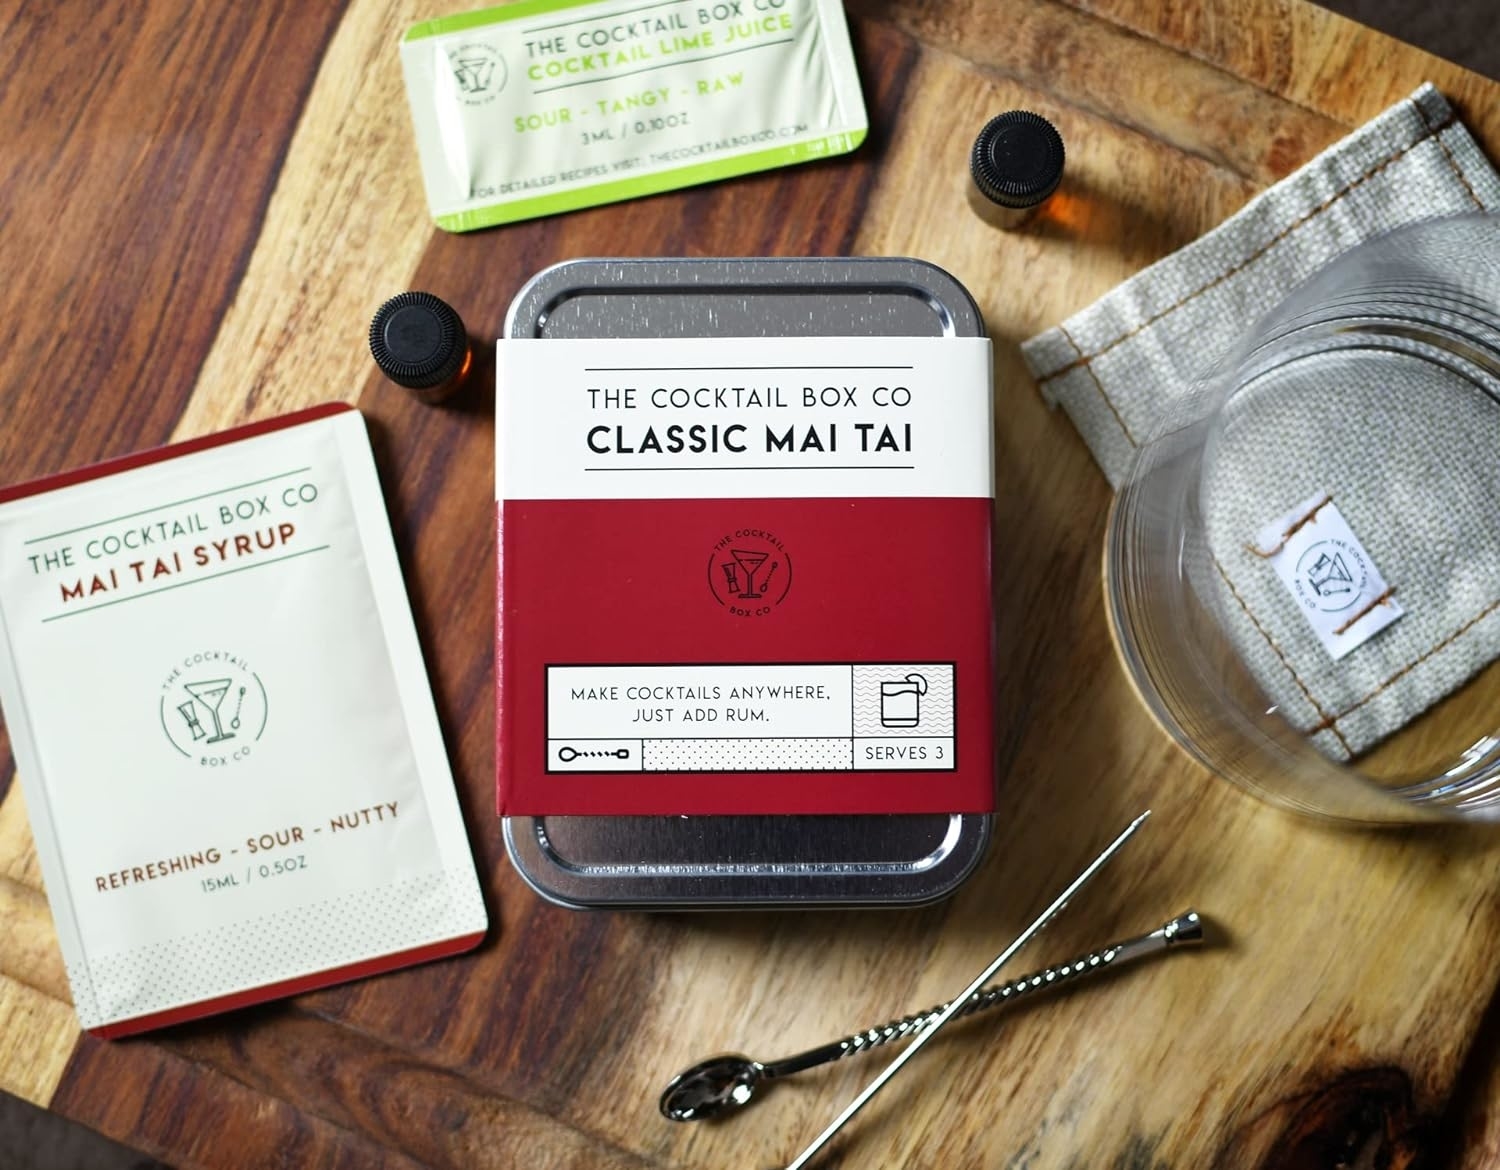 Classic Mai Tai cocktail kit with ingredients and tools displayed on a wooden surface